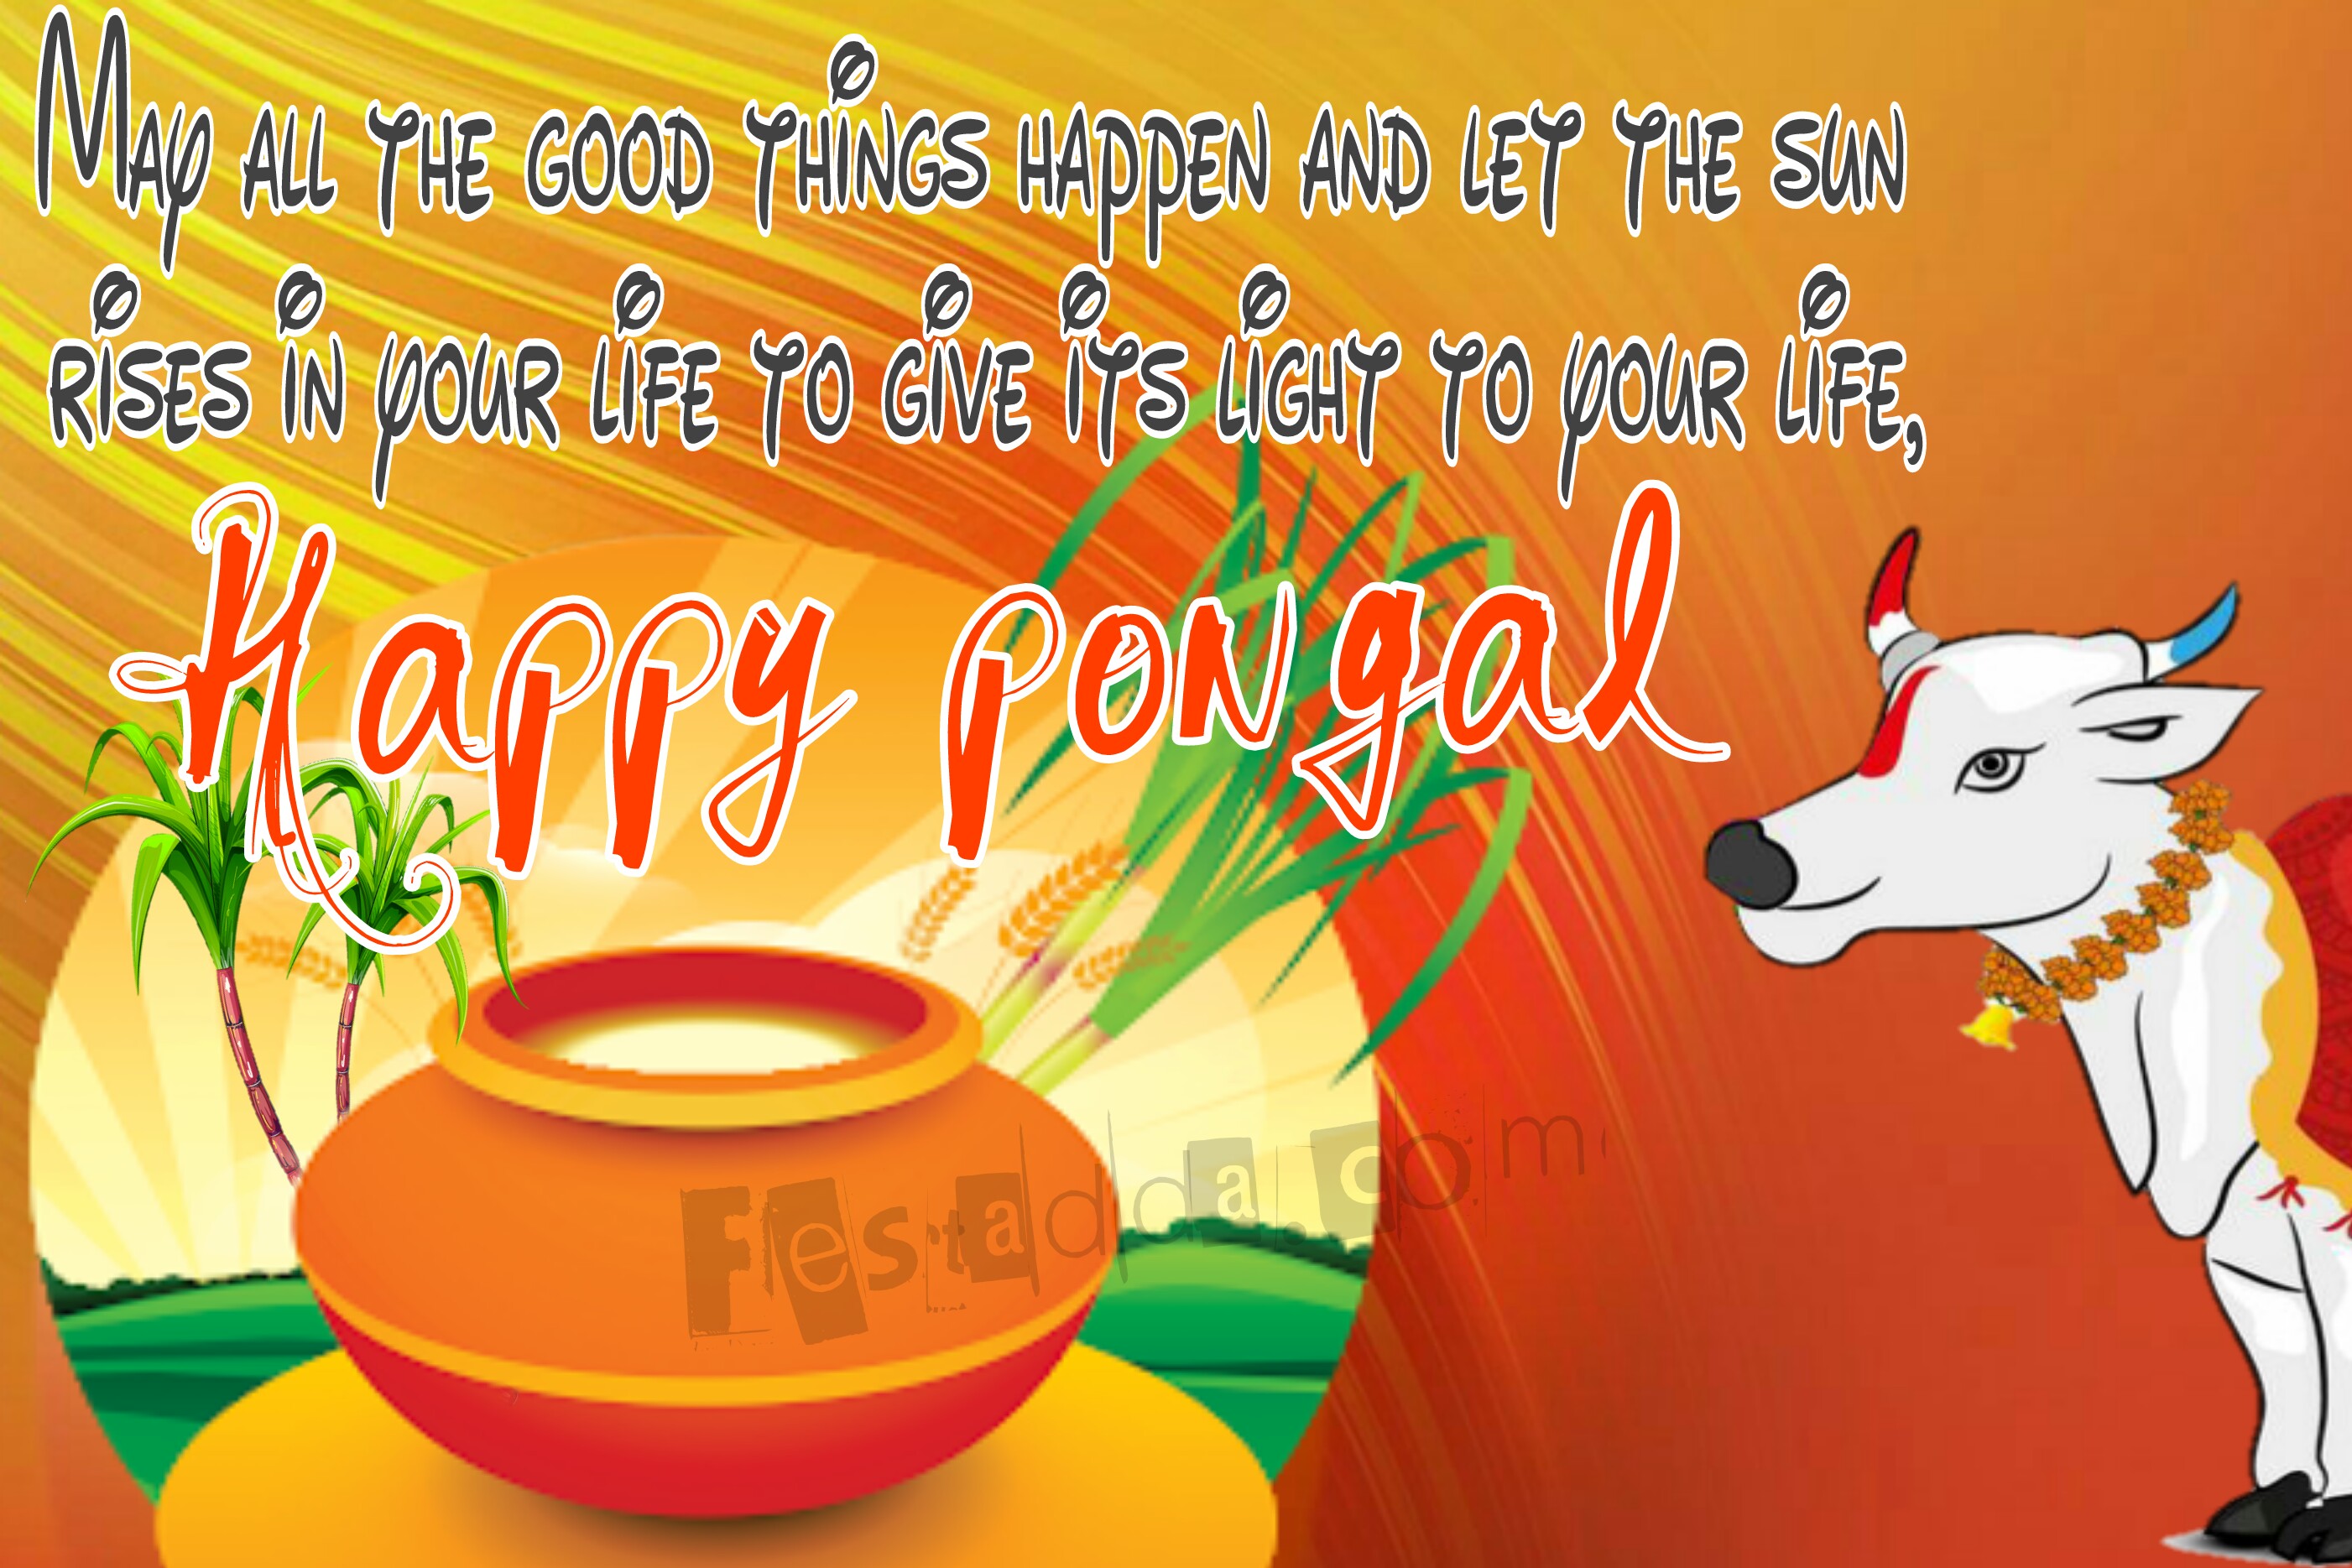 Pongal Valthu In Tamil தமிழில் பொங்கல் வால்டு Pongal - Pongal Hd Clipart Png , HD Wallpaper & Backgrounds